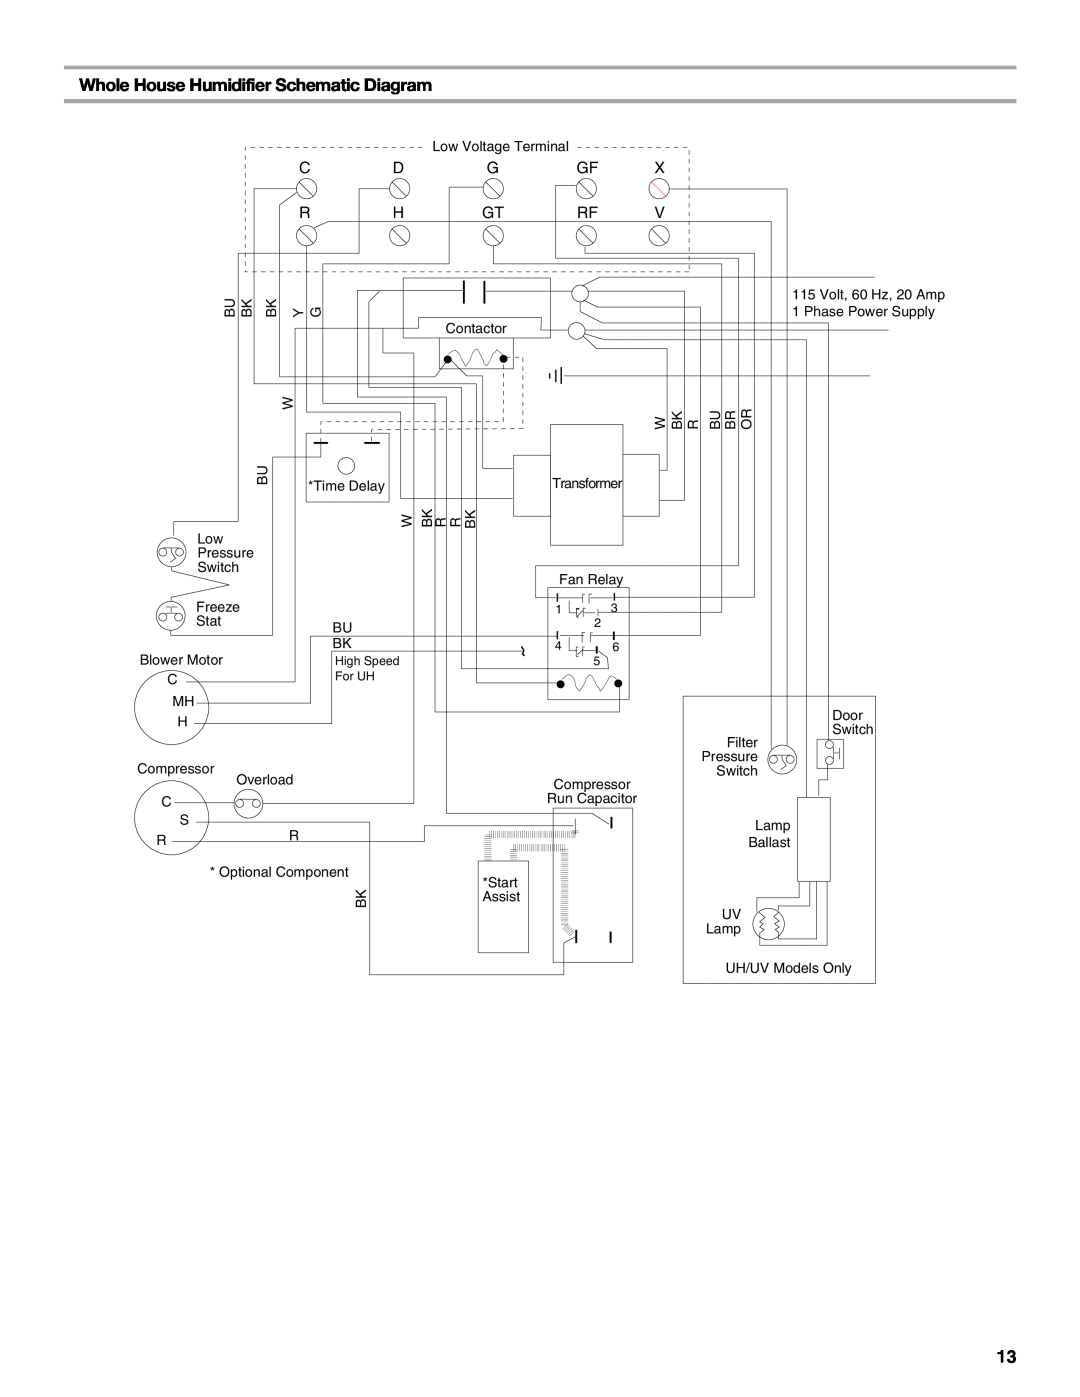 Whirlpool WPDV160XS, WGDV160UH, WPDH160XS, WGDH160UH installation instructions Whole House Humidifier Schematic Diagram 